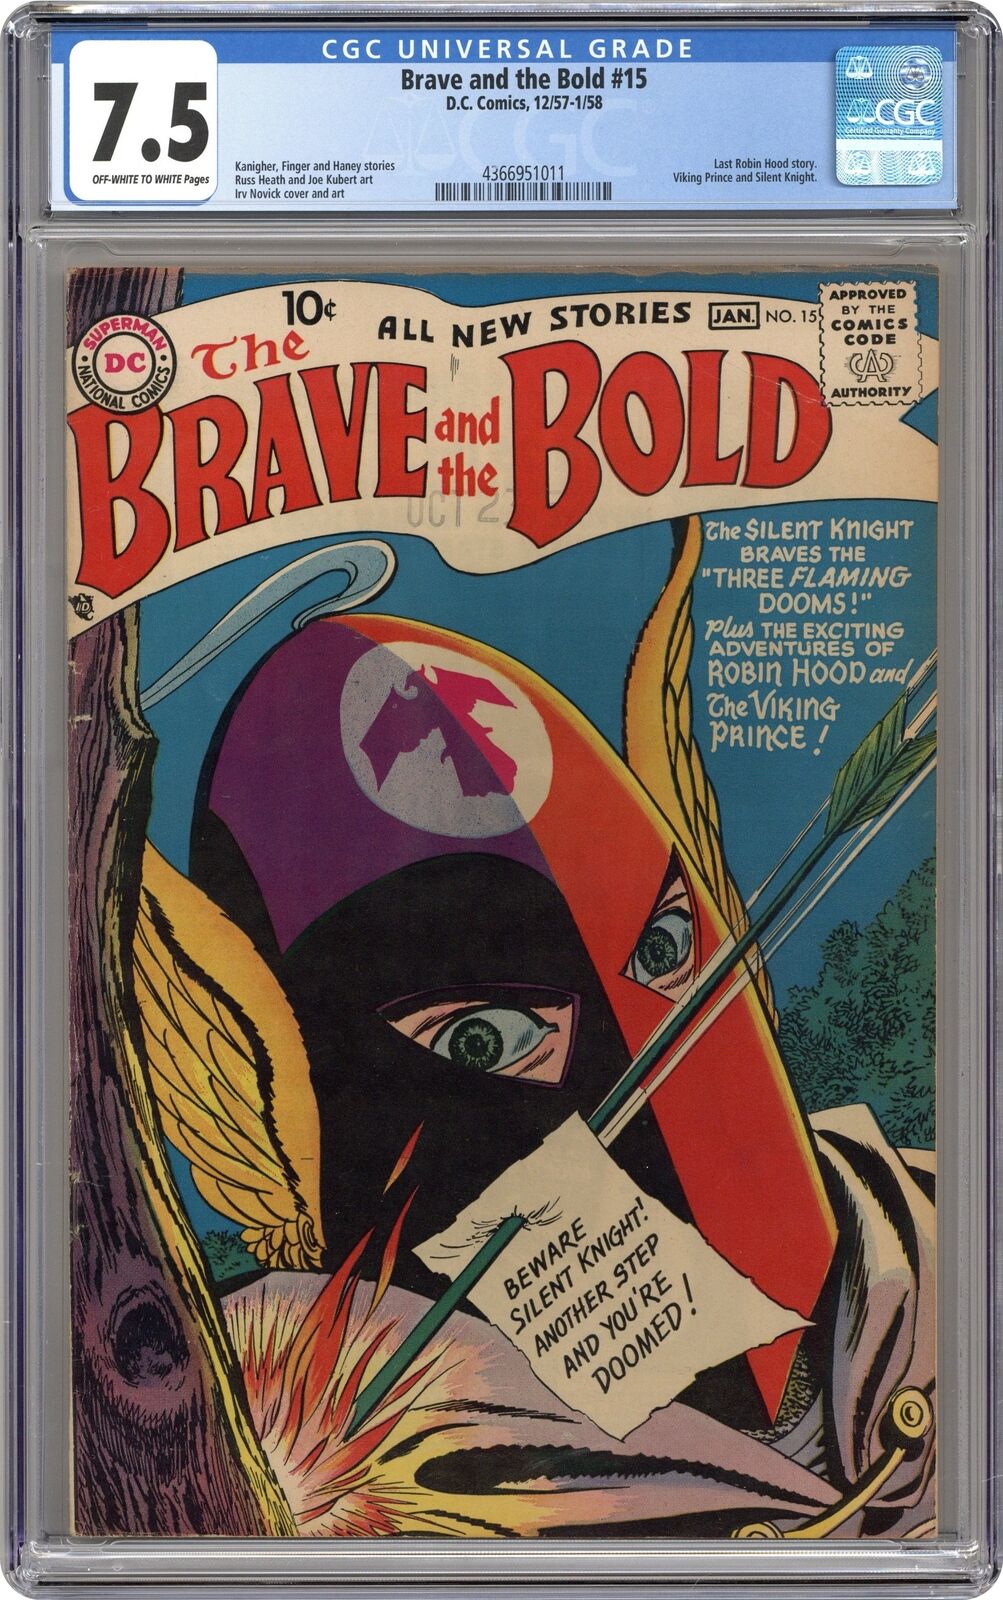 Brave and the Bold #15 CGC 7.5 1958 4366951011